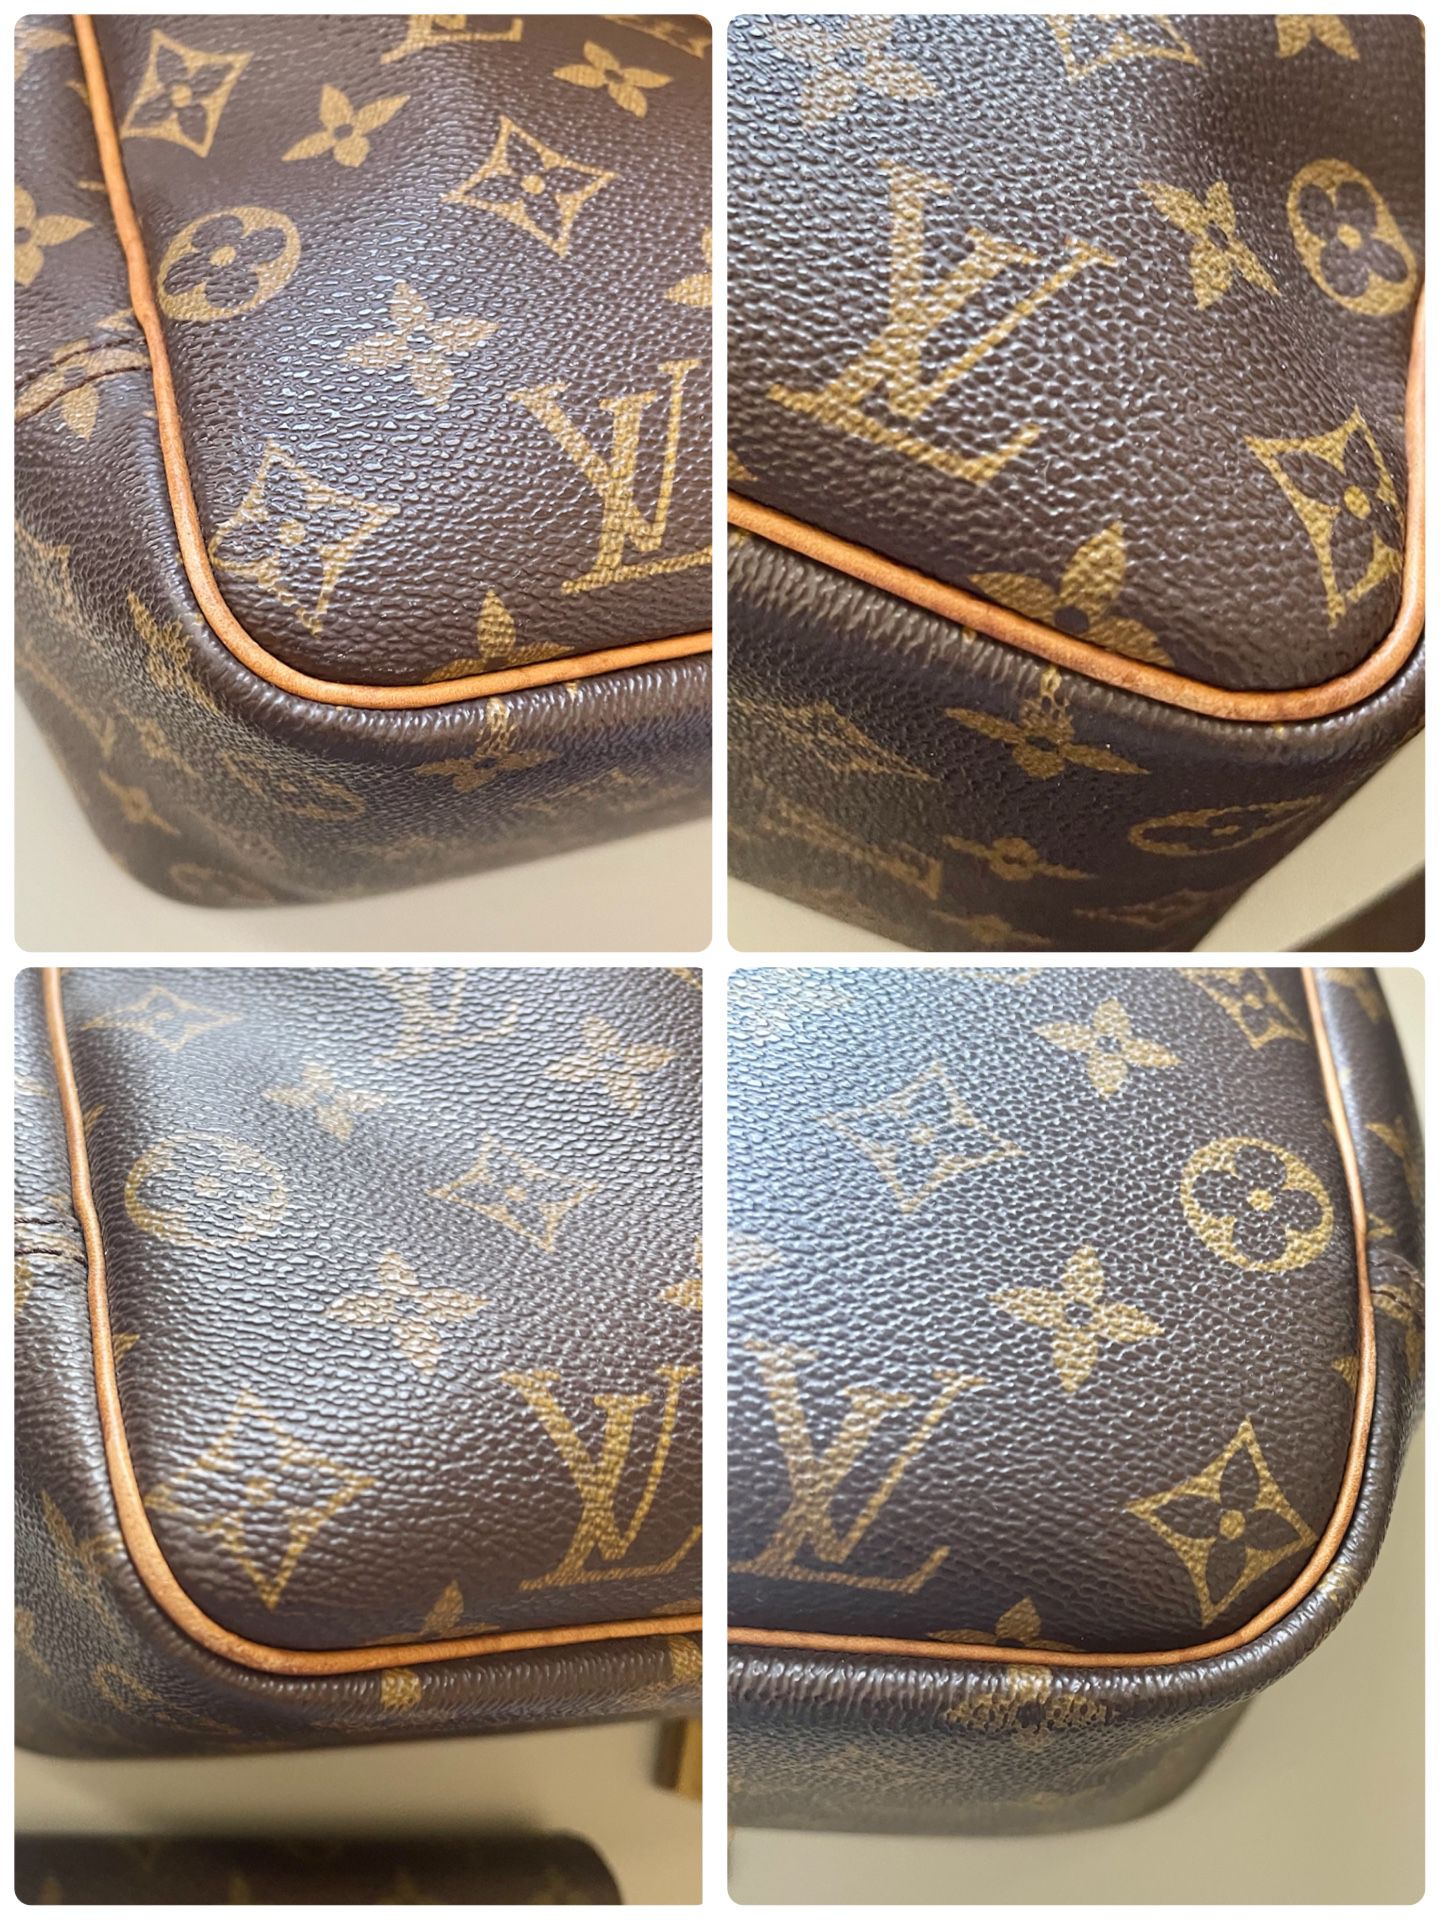 Authentic Louis Vuitton, vintage BoHo bag **Perfect For Stagecoach for Sale  in Anaheim, CA - OfferUp